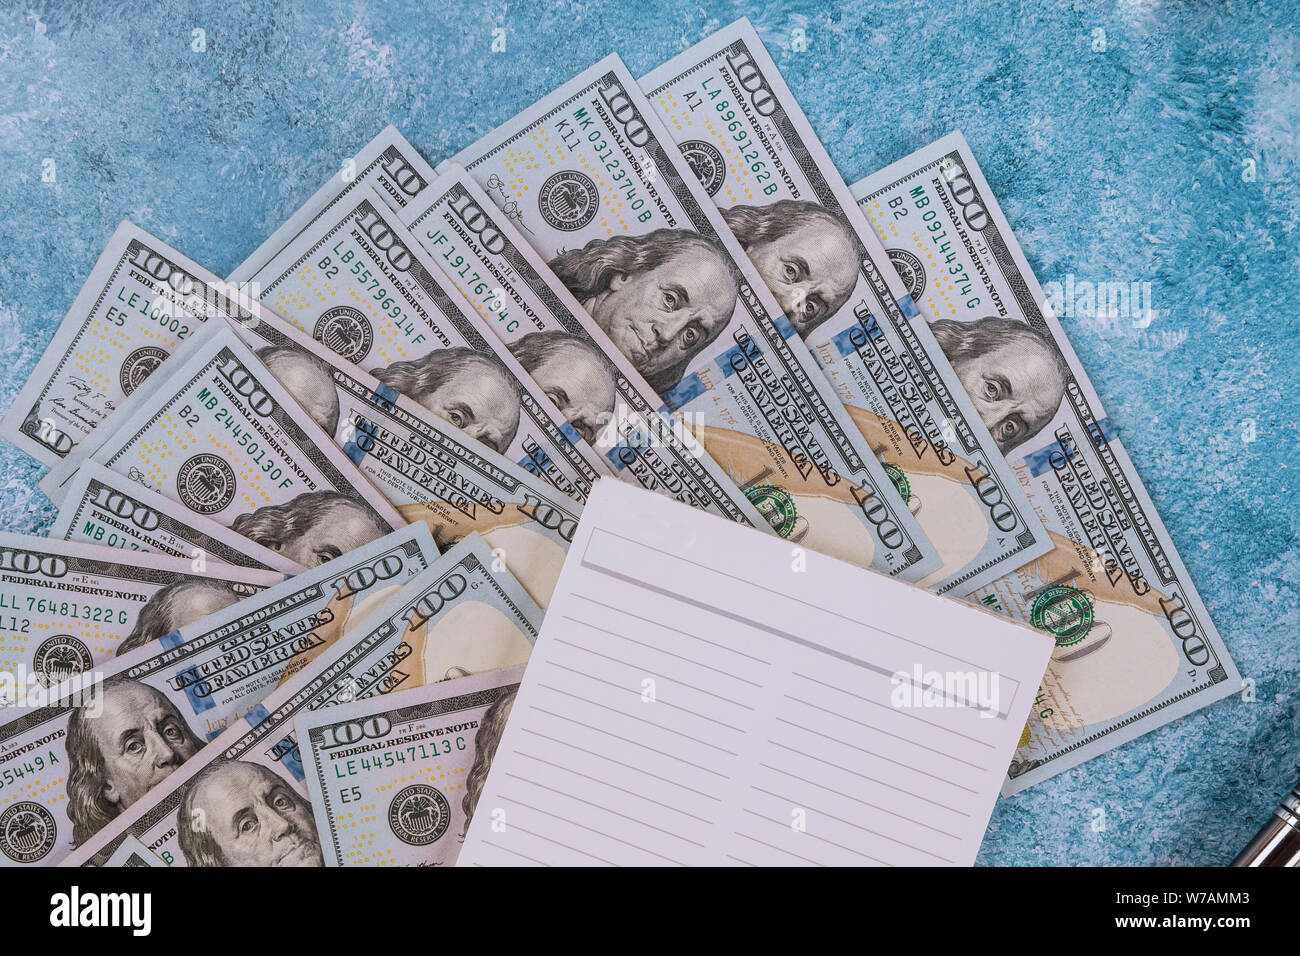 Notebook and dollars on blue marble background. Stock Photo